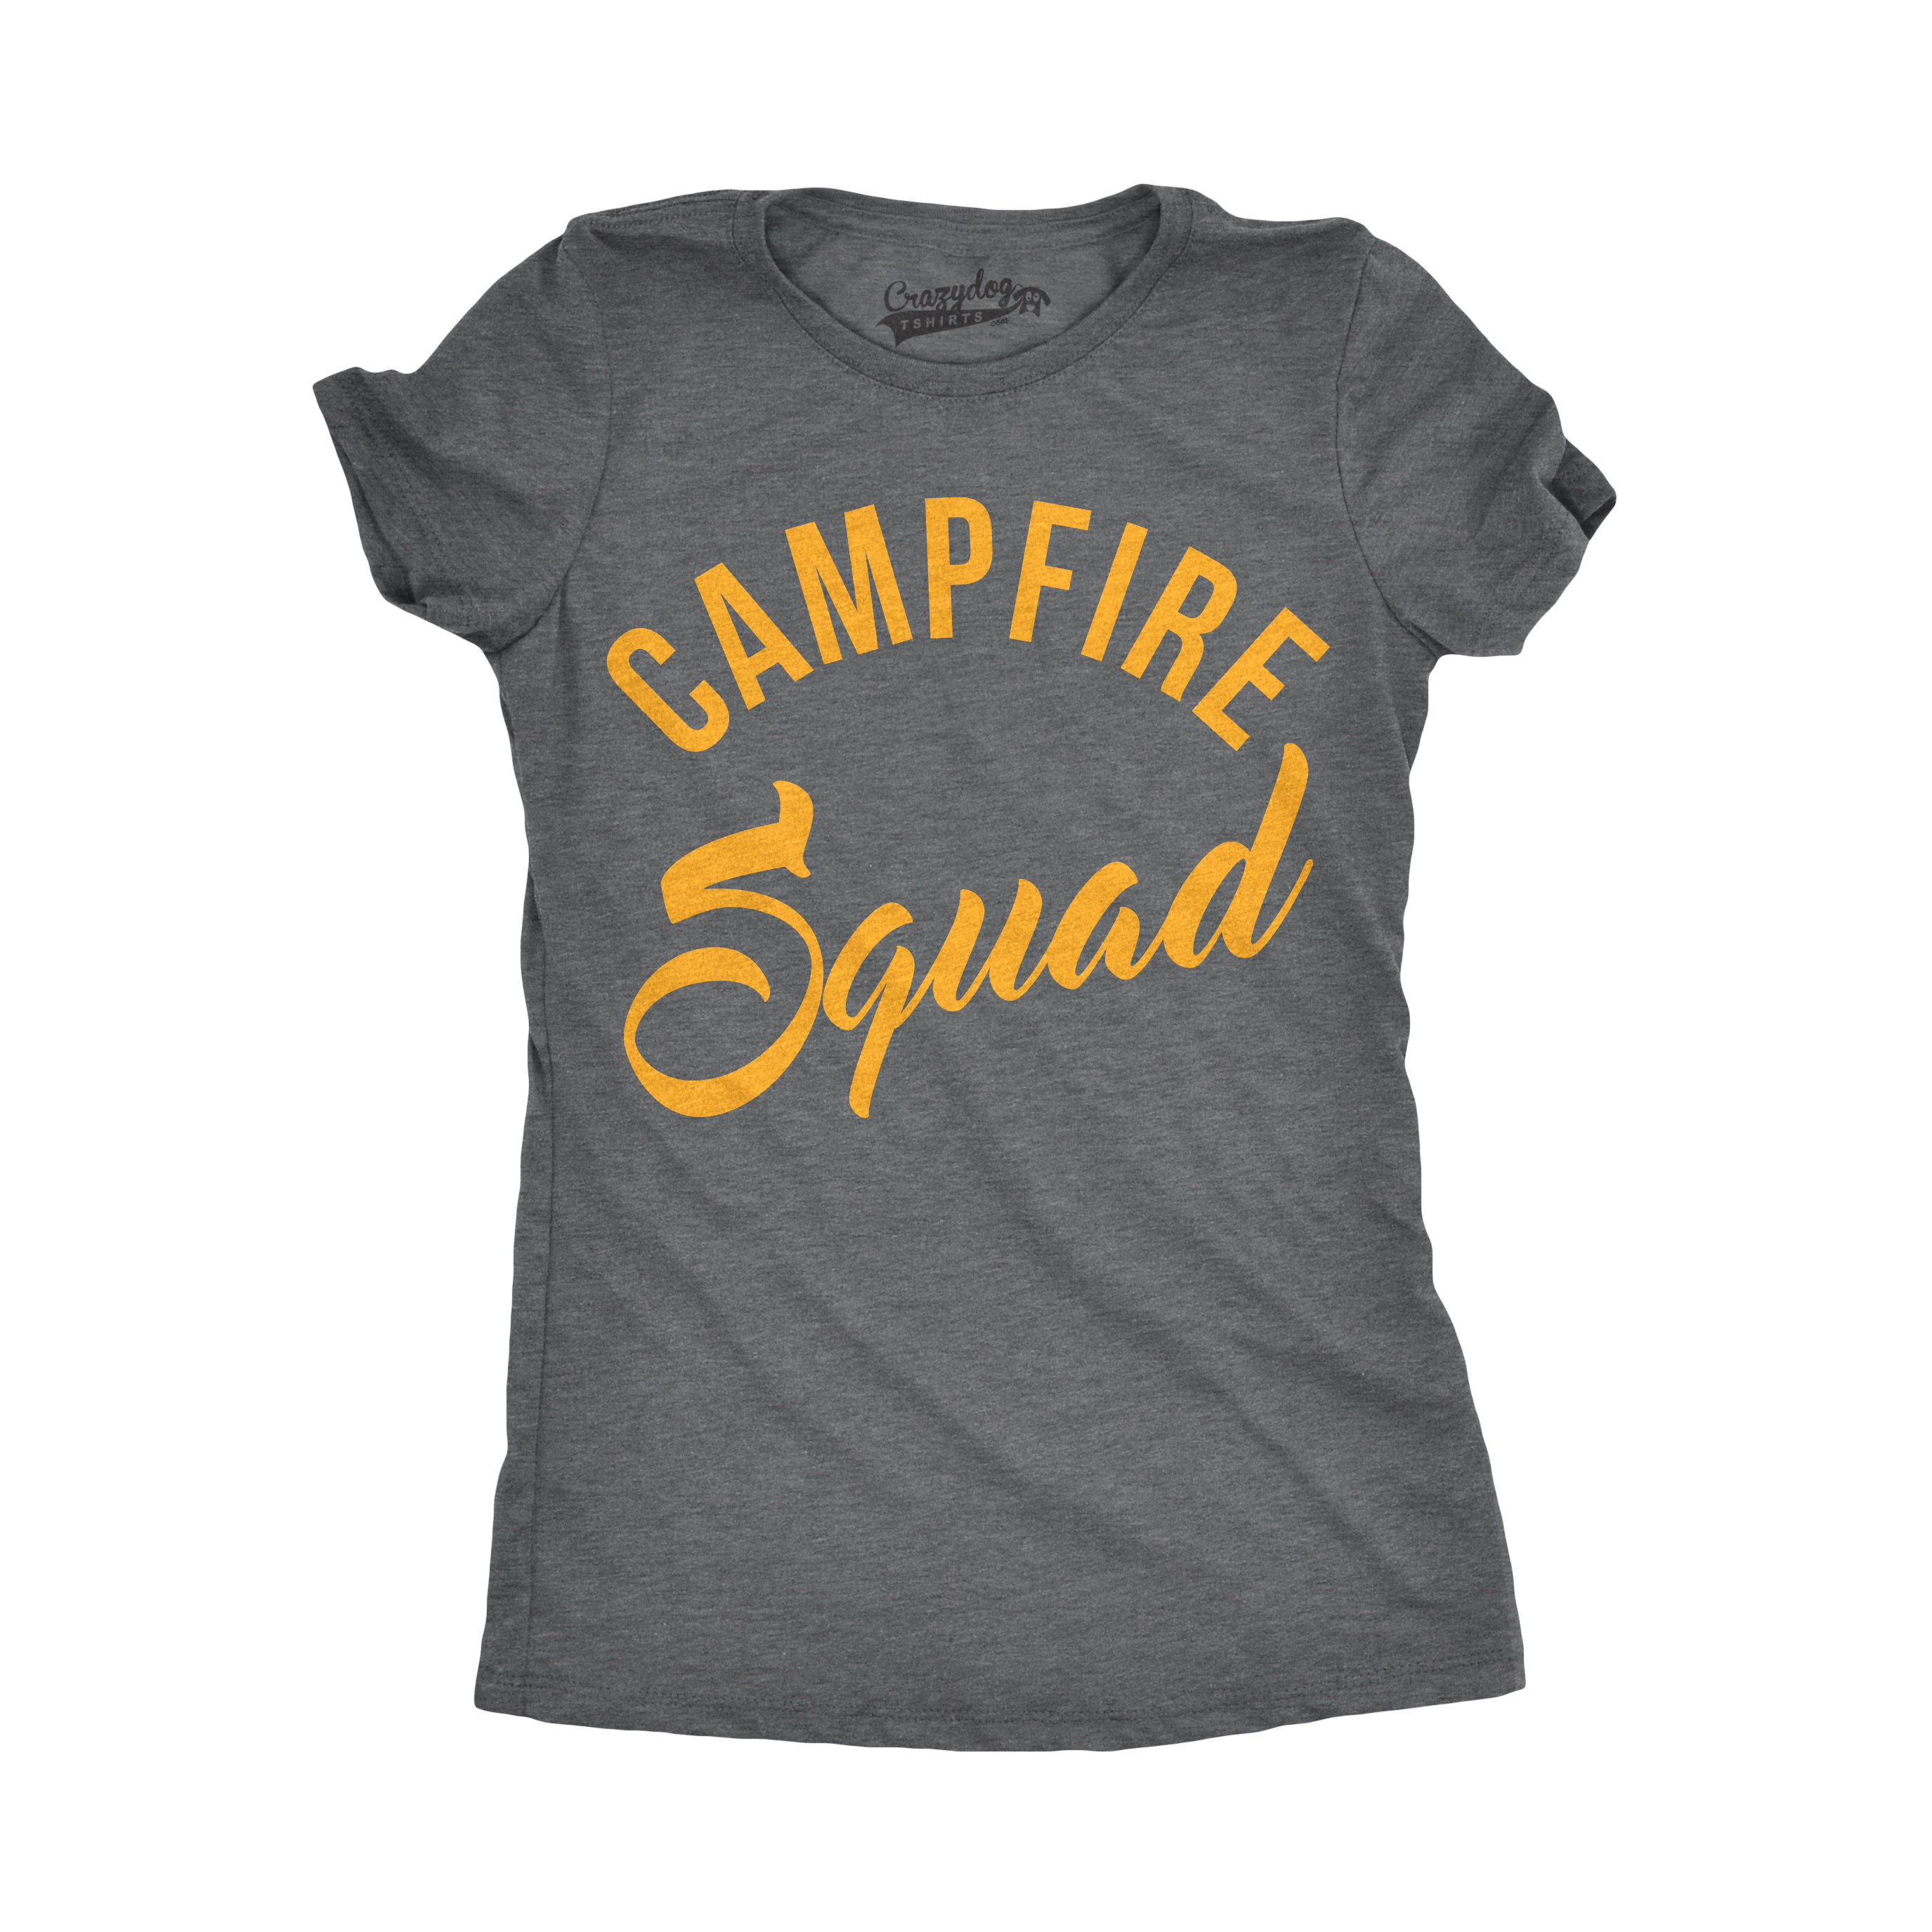 Womens Campfire Squad Graphic T Shirt for Camping Summer Vacation Camper Tee Womens Graphic Tees - image 1 of 8